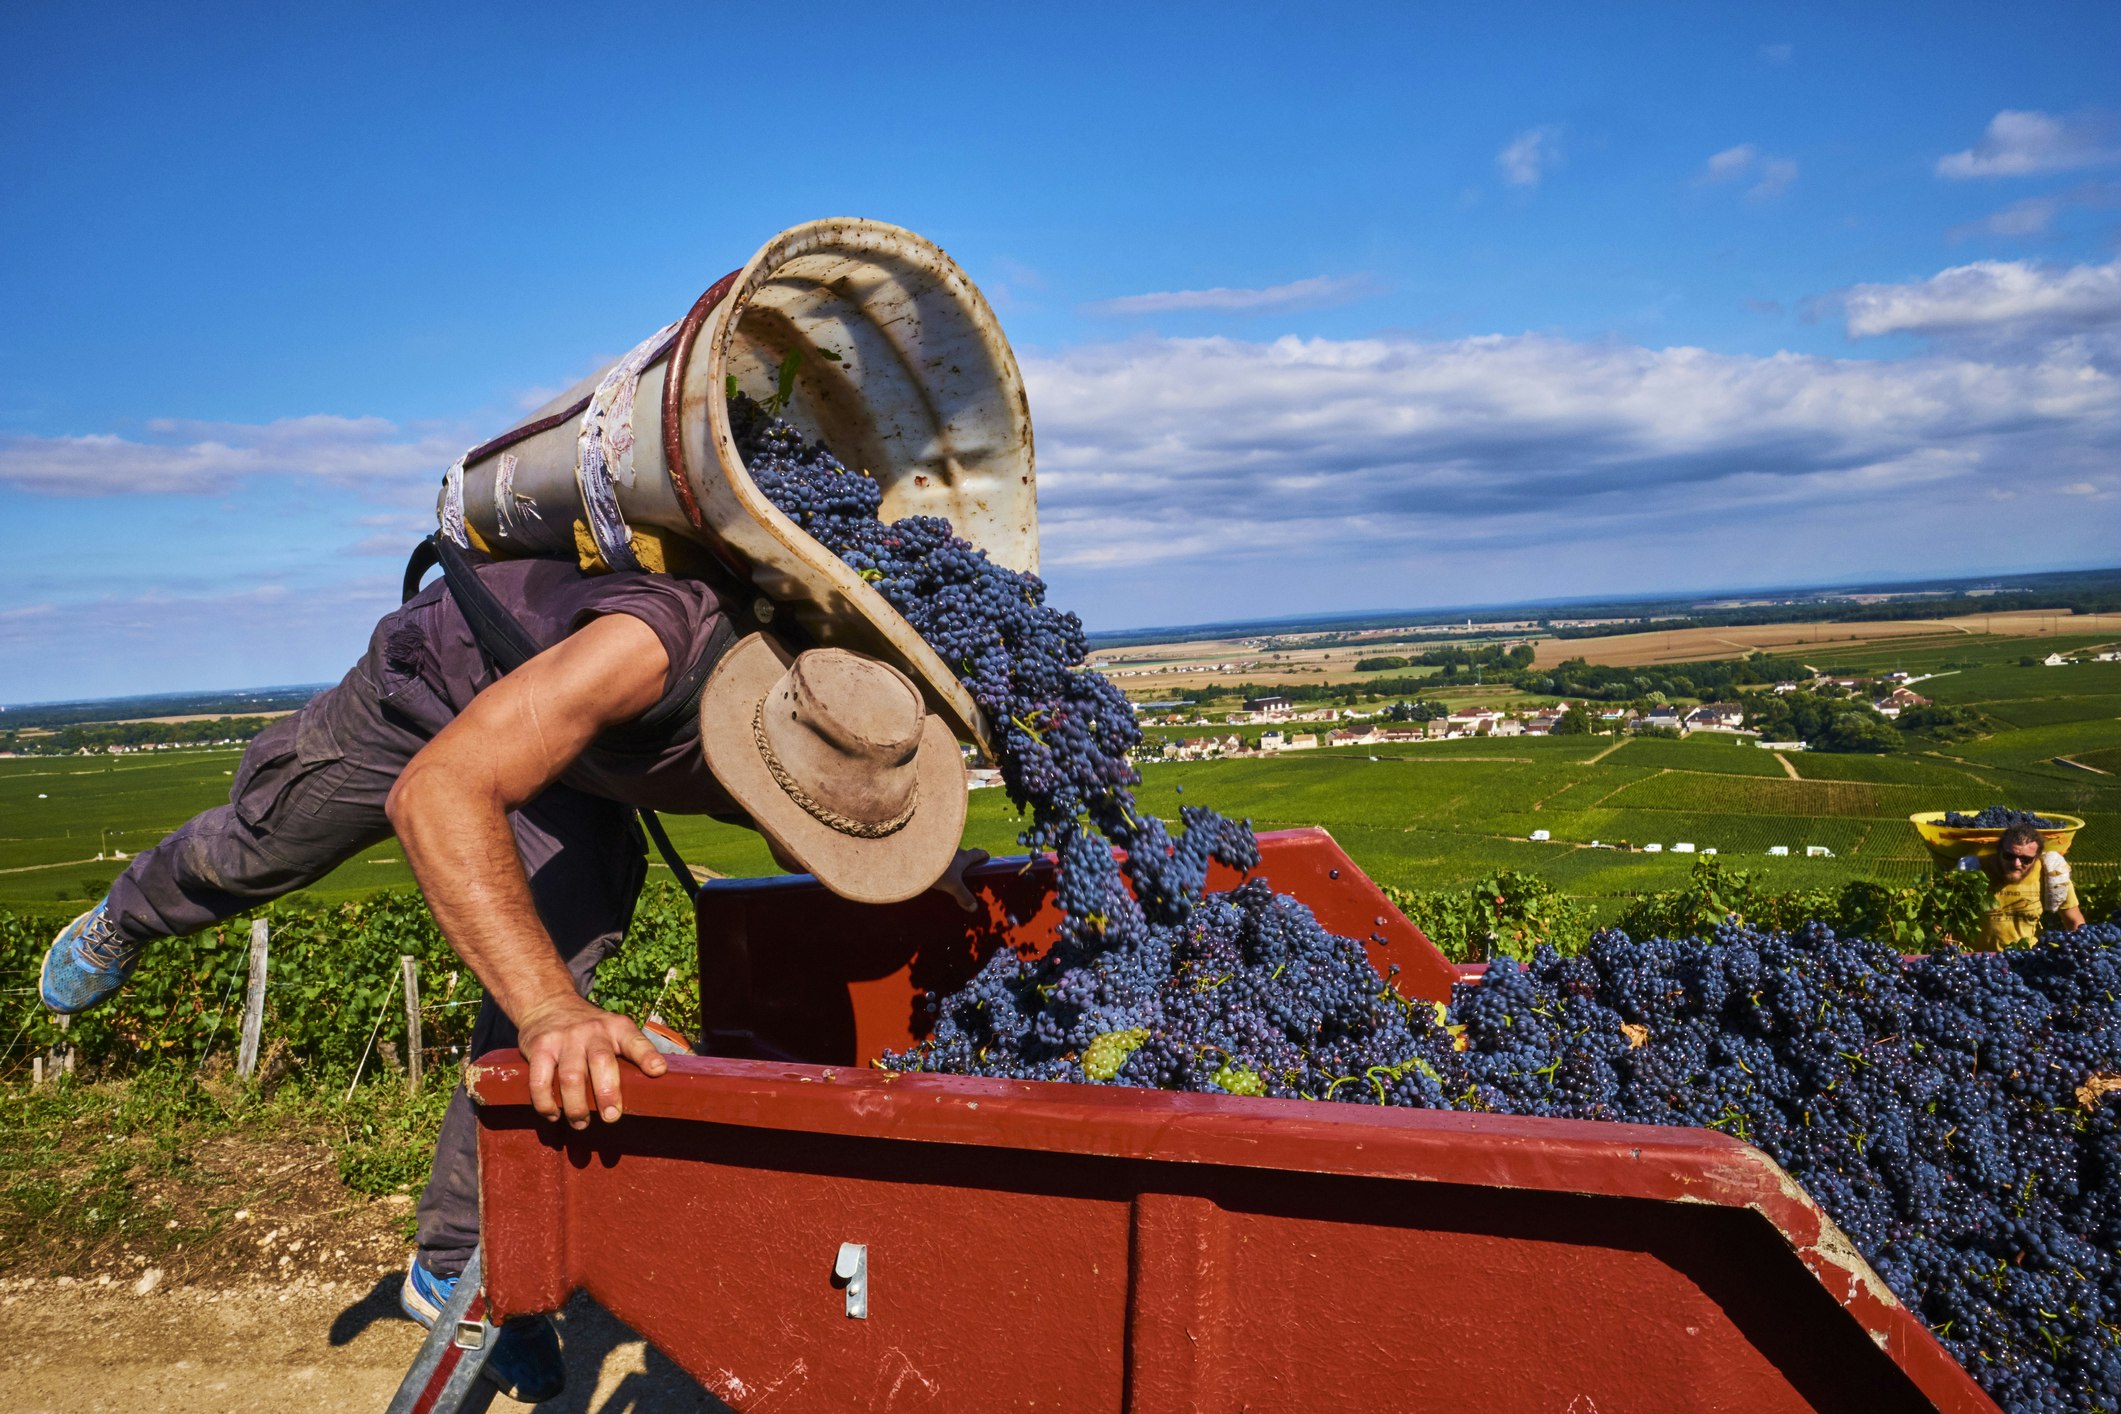 A man heaves a container load of grapes into the back of a vehicle during the grape harvest at the vineyard of Vosne Romaná